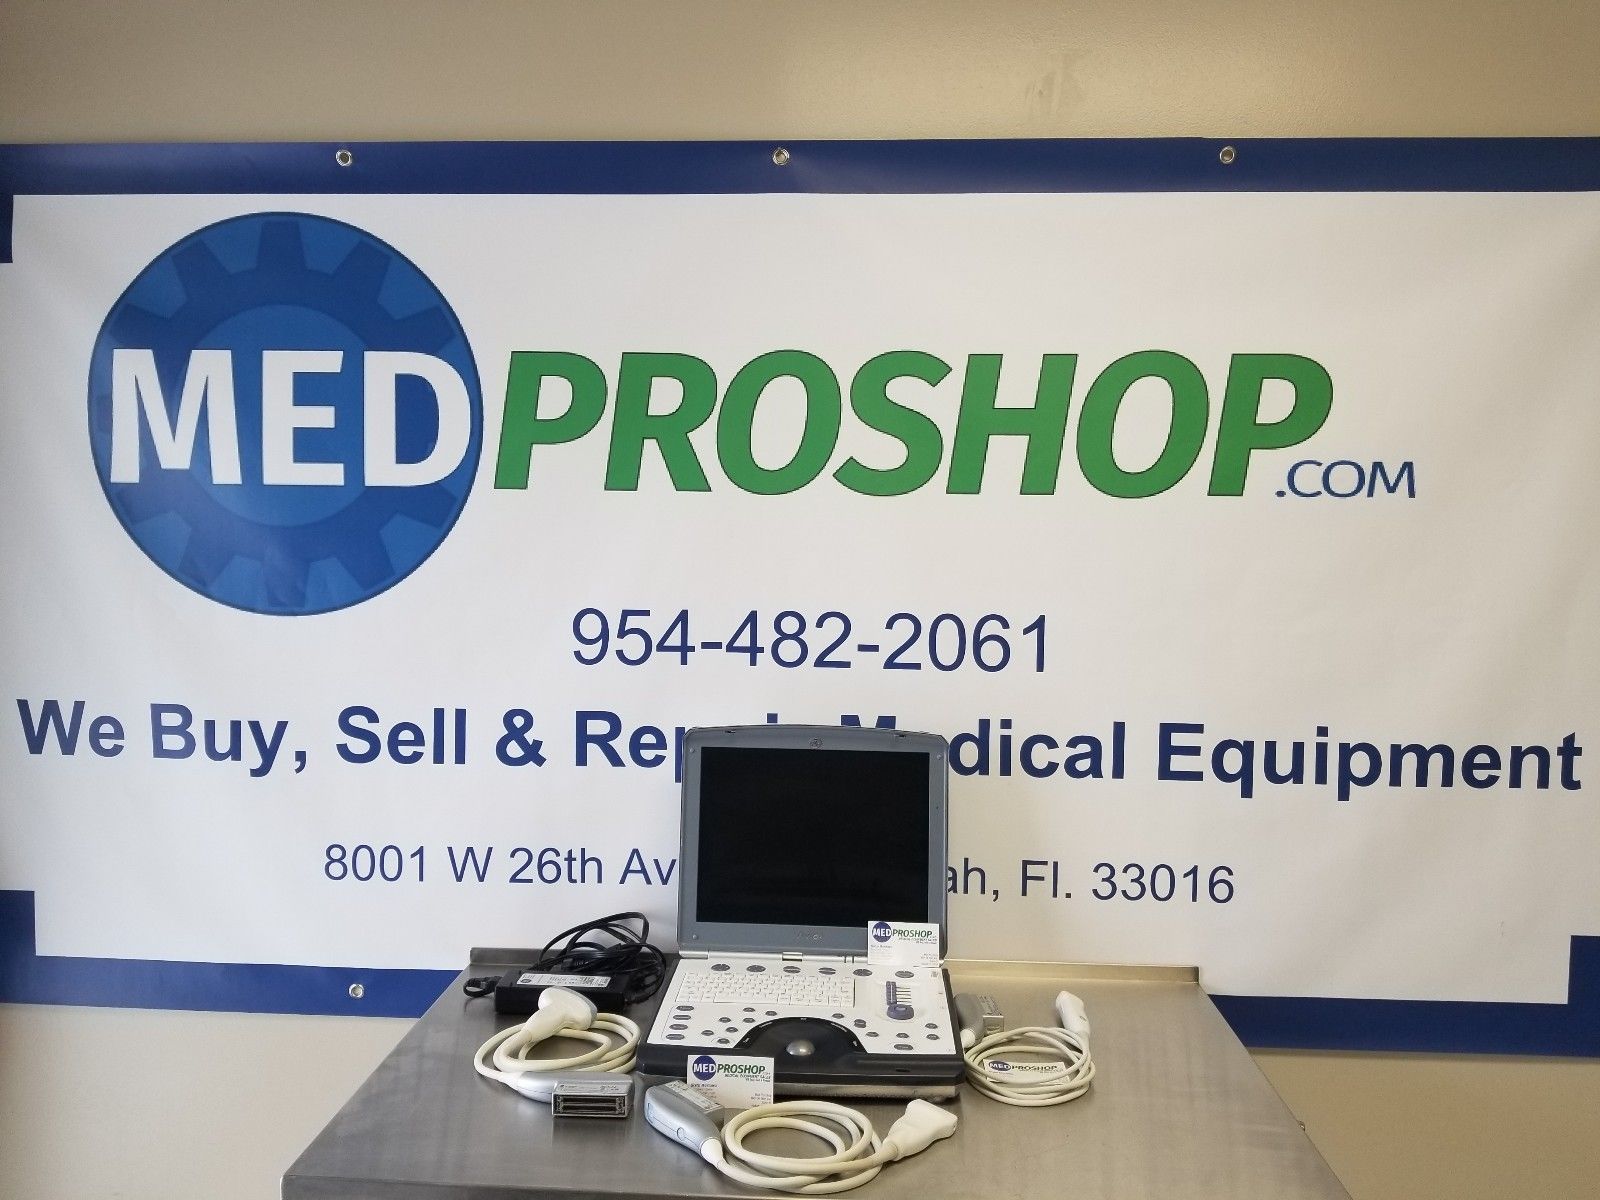 ultrasound with accessories with banner